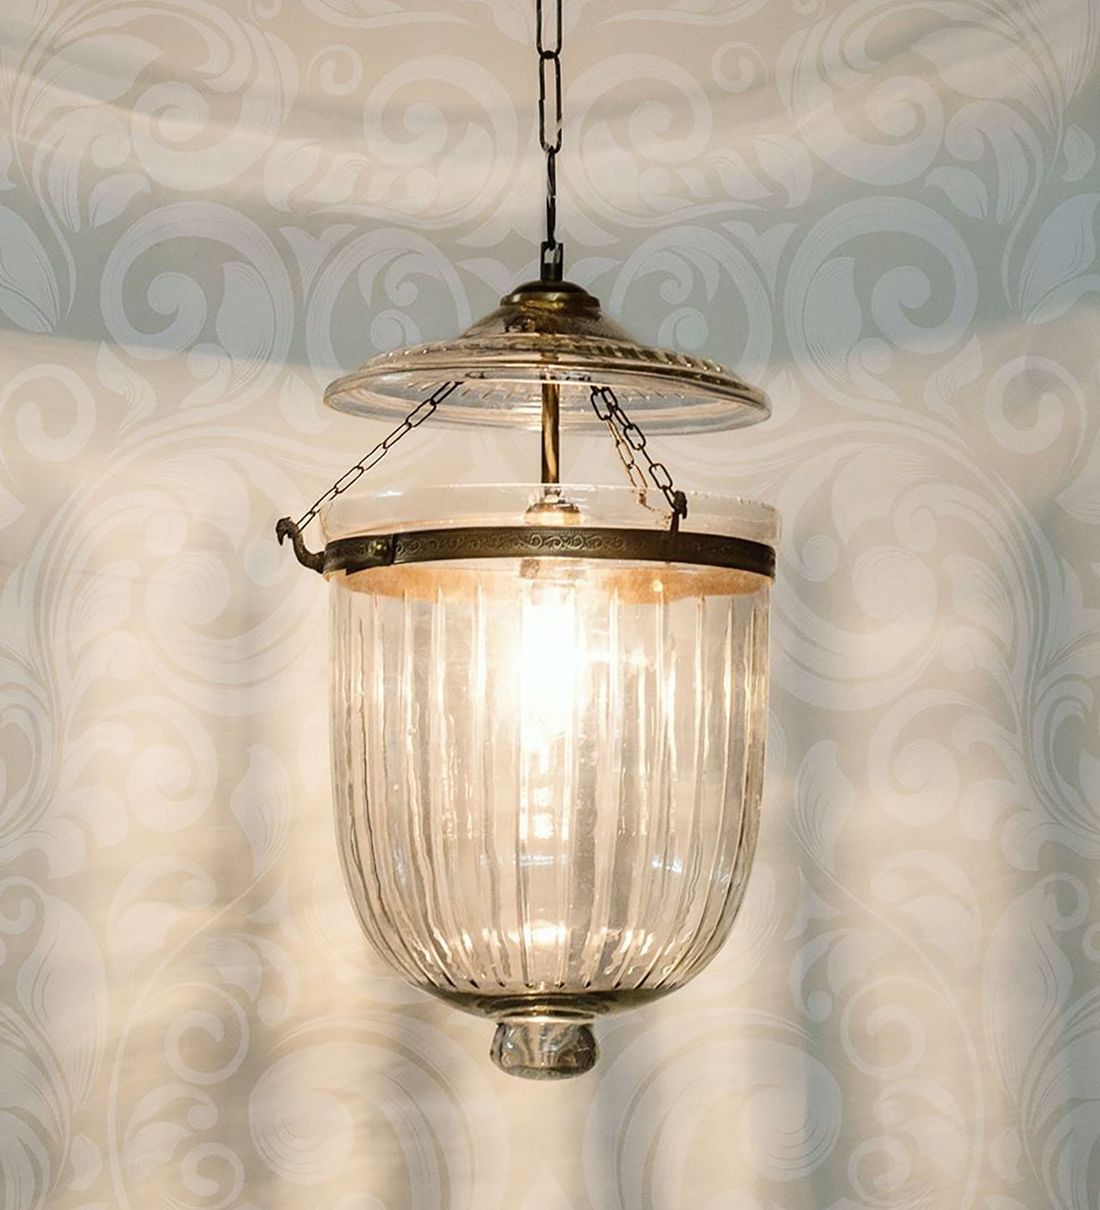 Buy Transparent Glass Single Hanging Lightsfos Lighting Online –  Novelty Hanging Lights – Ceiling Lights – Lamps And Lighting – Pepperfry  Product Pertaining To Popular Brass Wrapped Lantern Chandeliers (View 10 of 15)